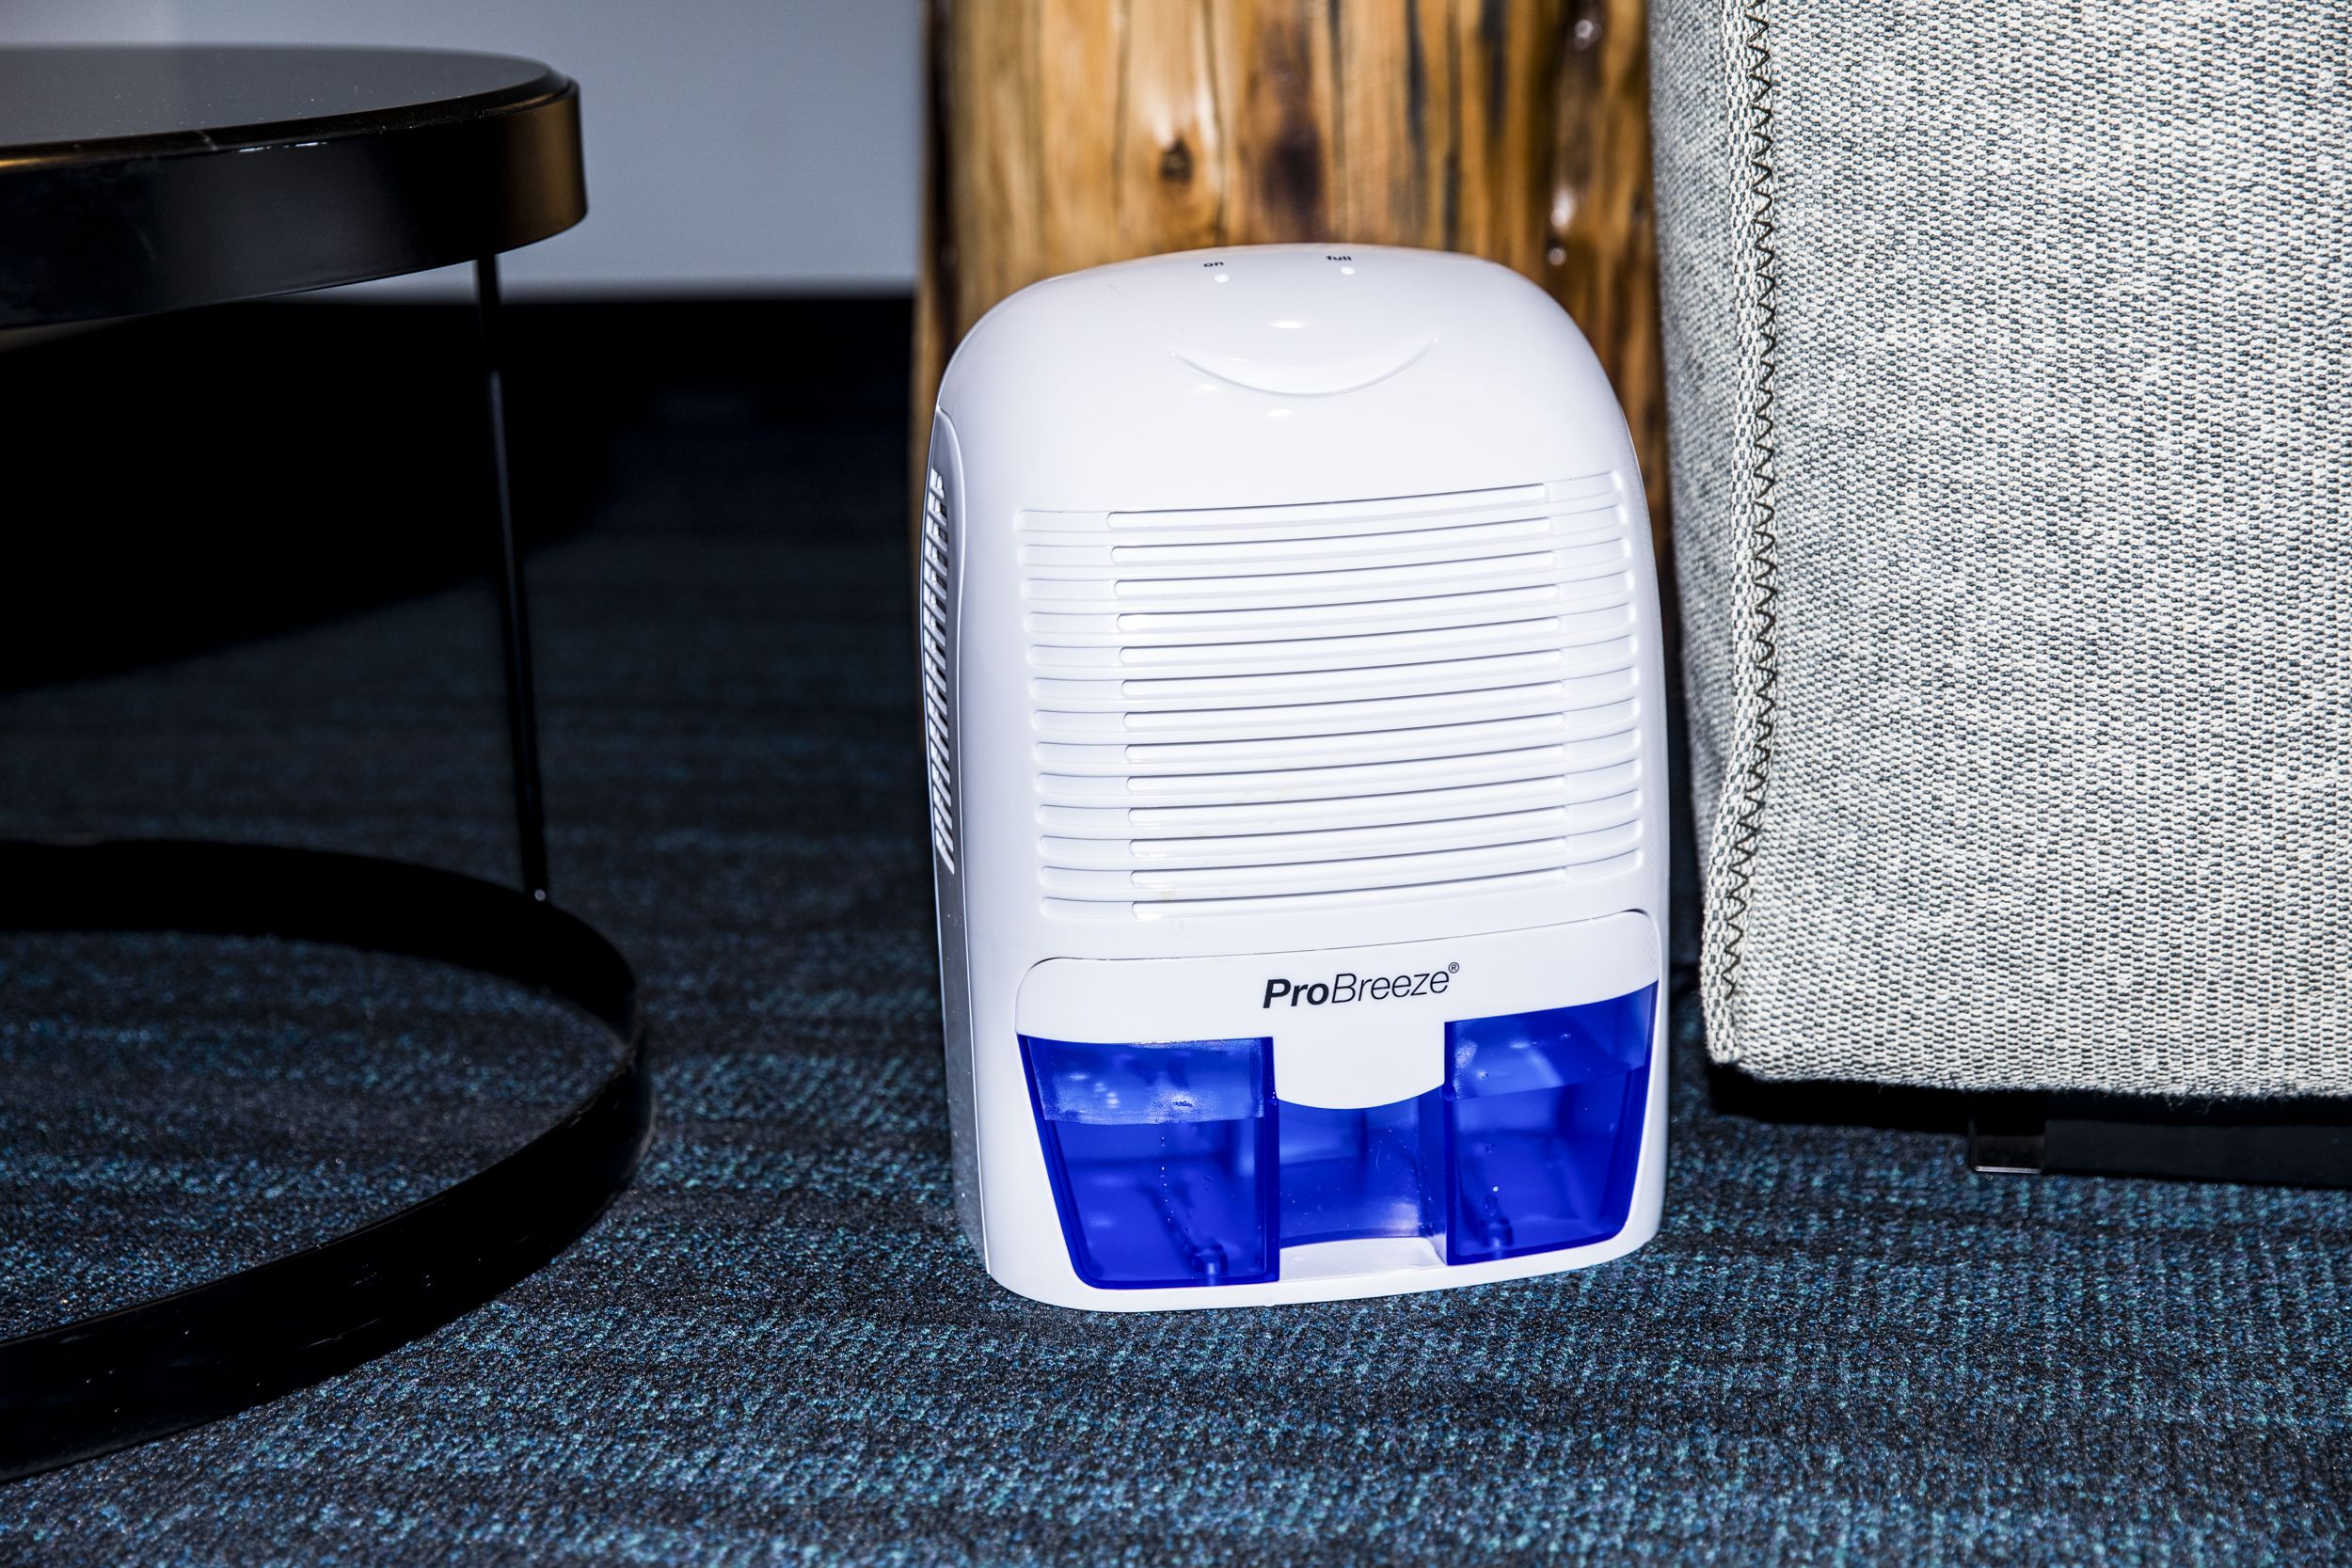 What Is the Best Humidity Setting for a Dehumidifier?